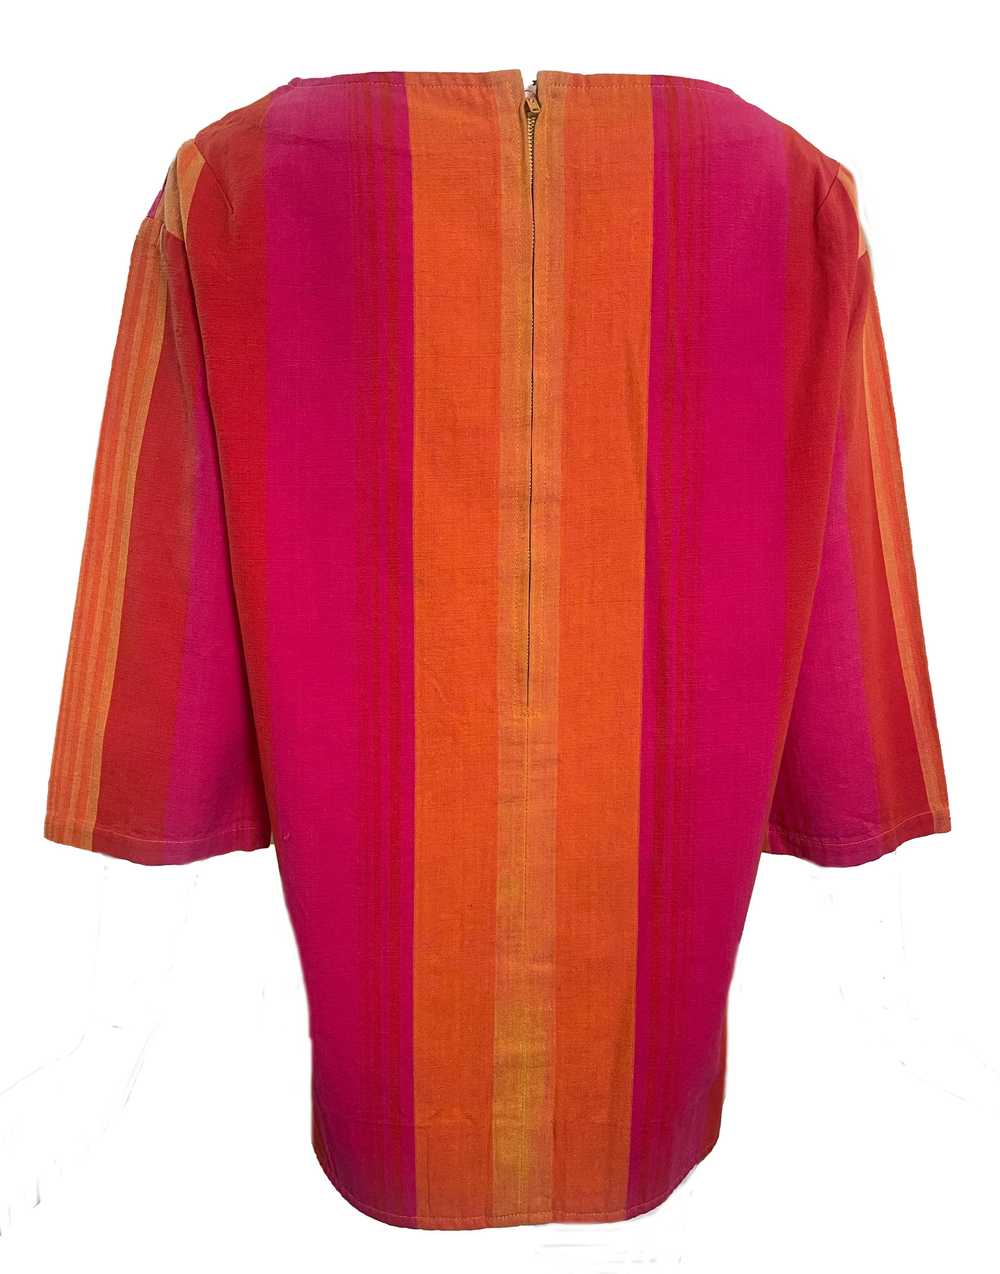 60s Novelty Striped Sherbet Colored Tunic Top wit… - image 3